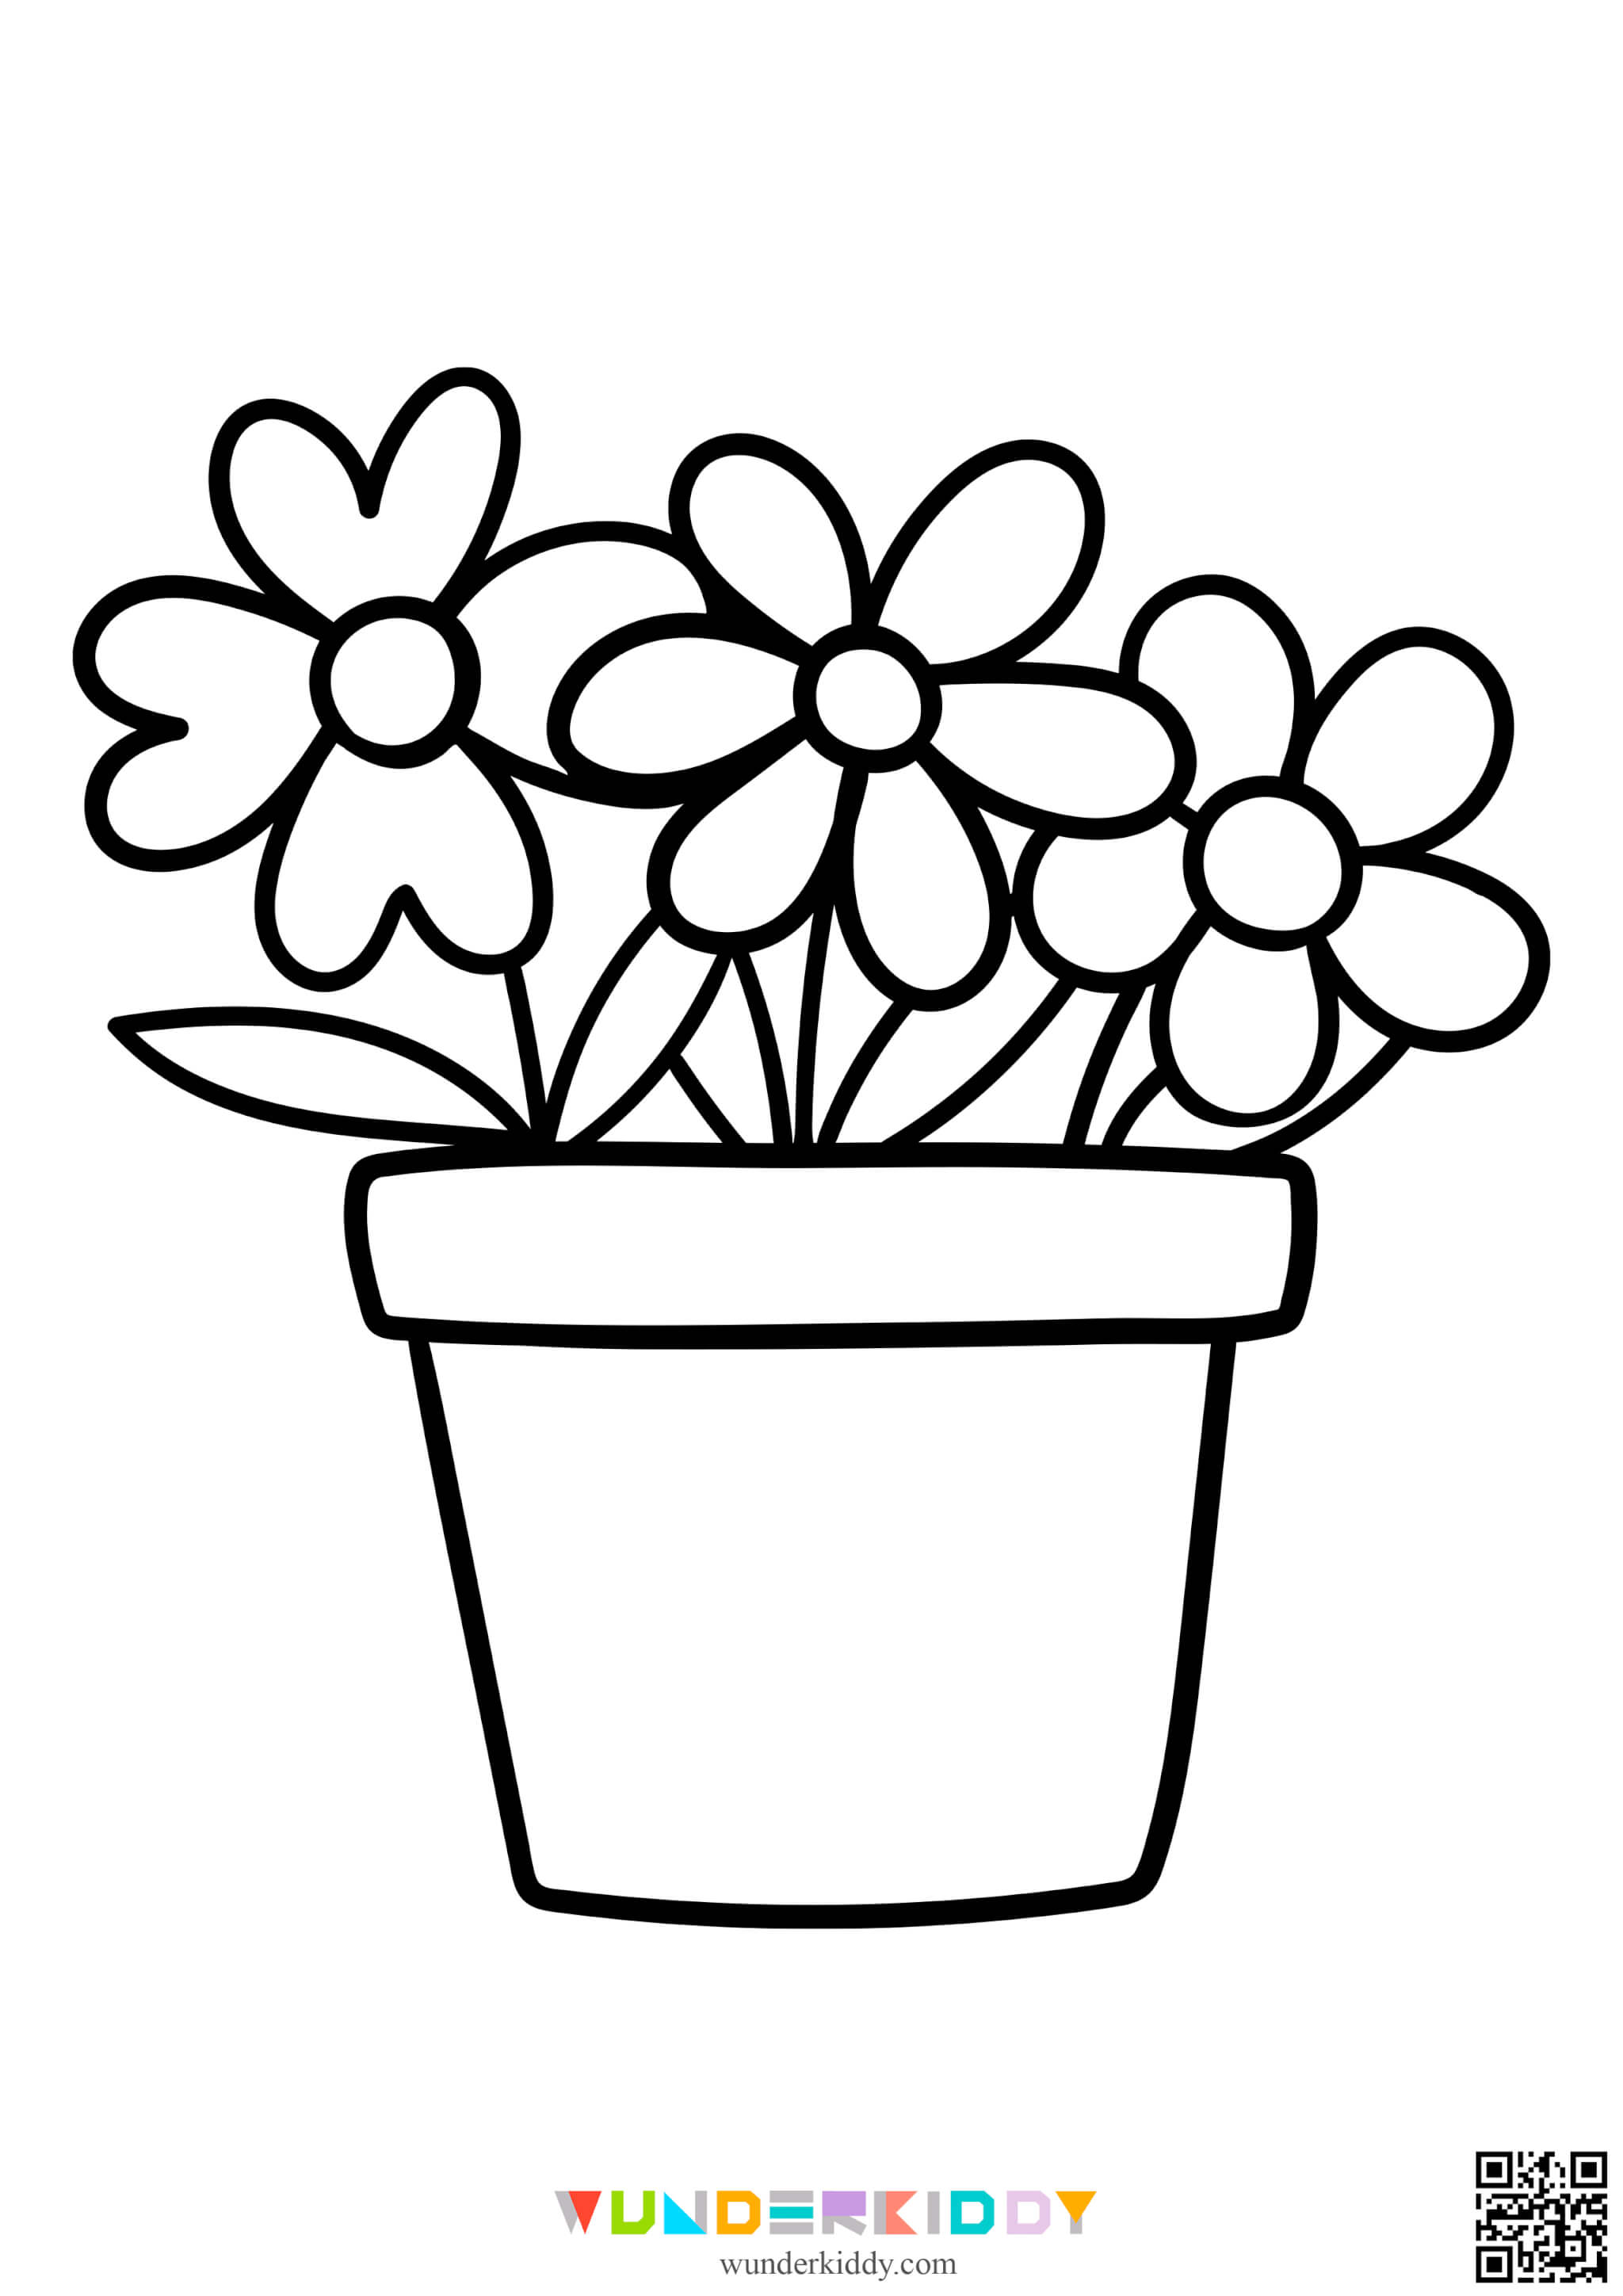 Spring Coloring Pages - Image 6